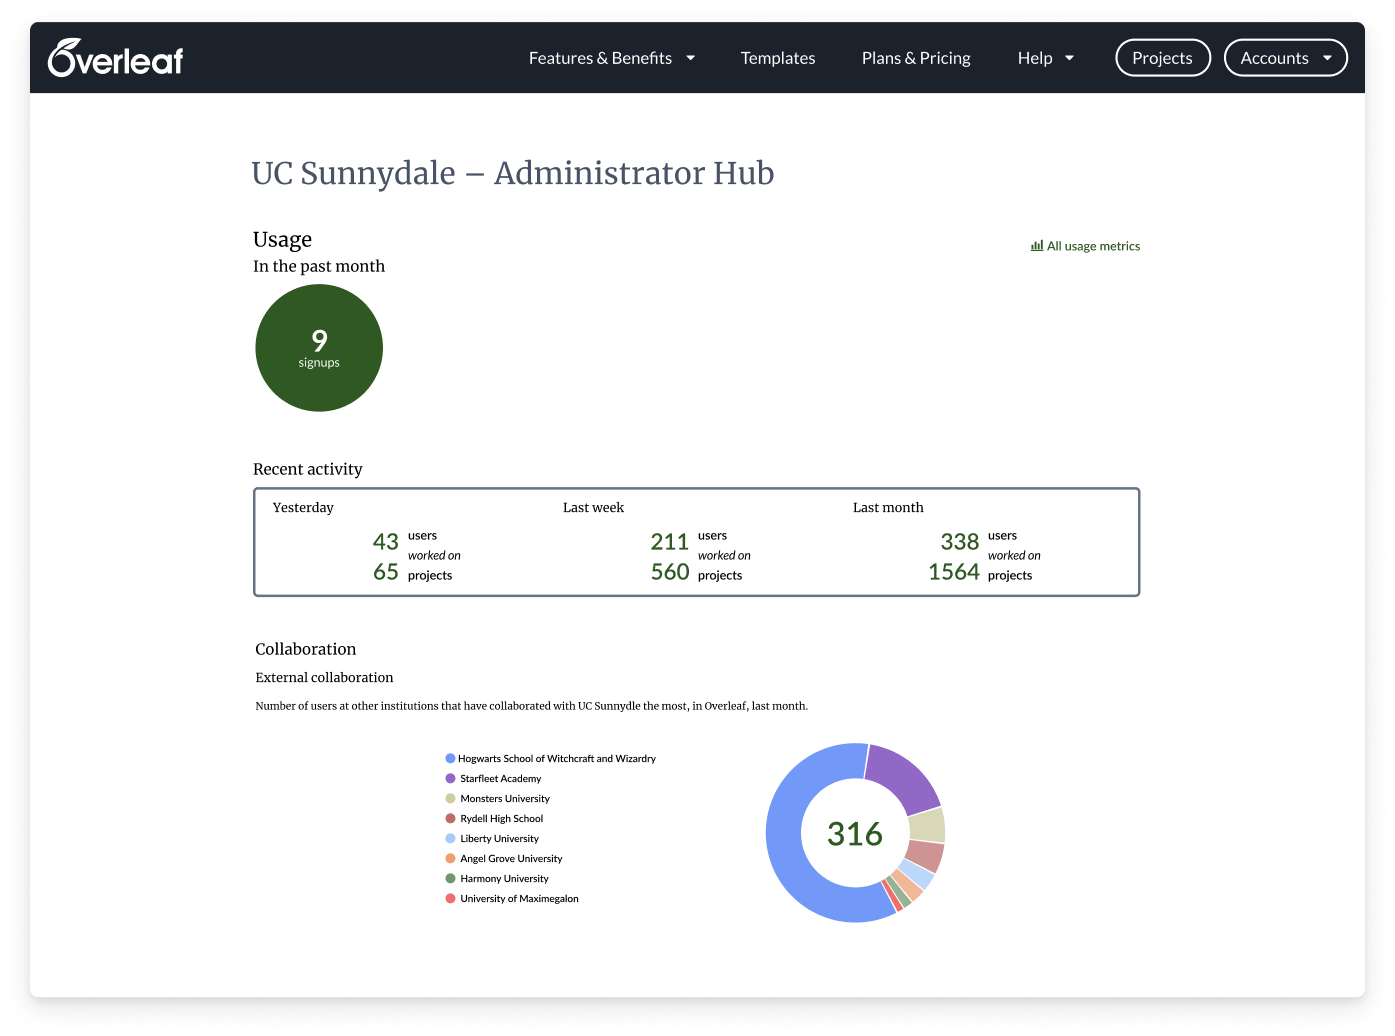 The Overleaf Admin hub for UC Sunnydale showing recent activity by users as well as collaborations with other institutions.